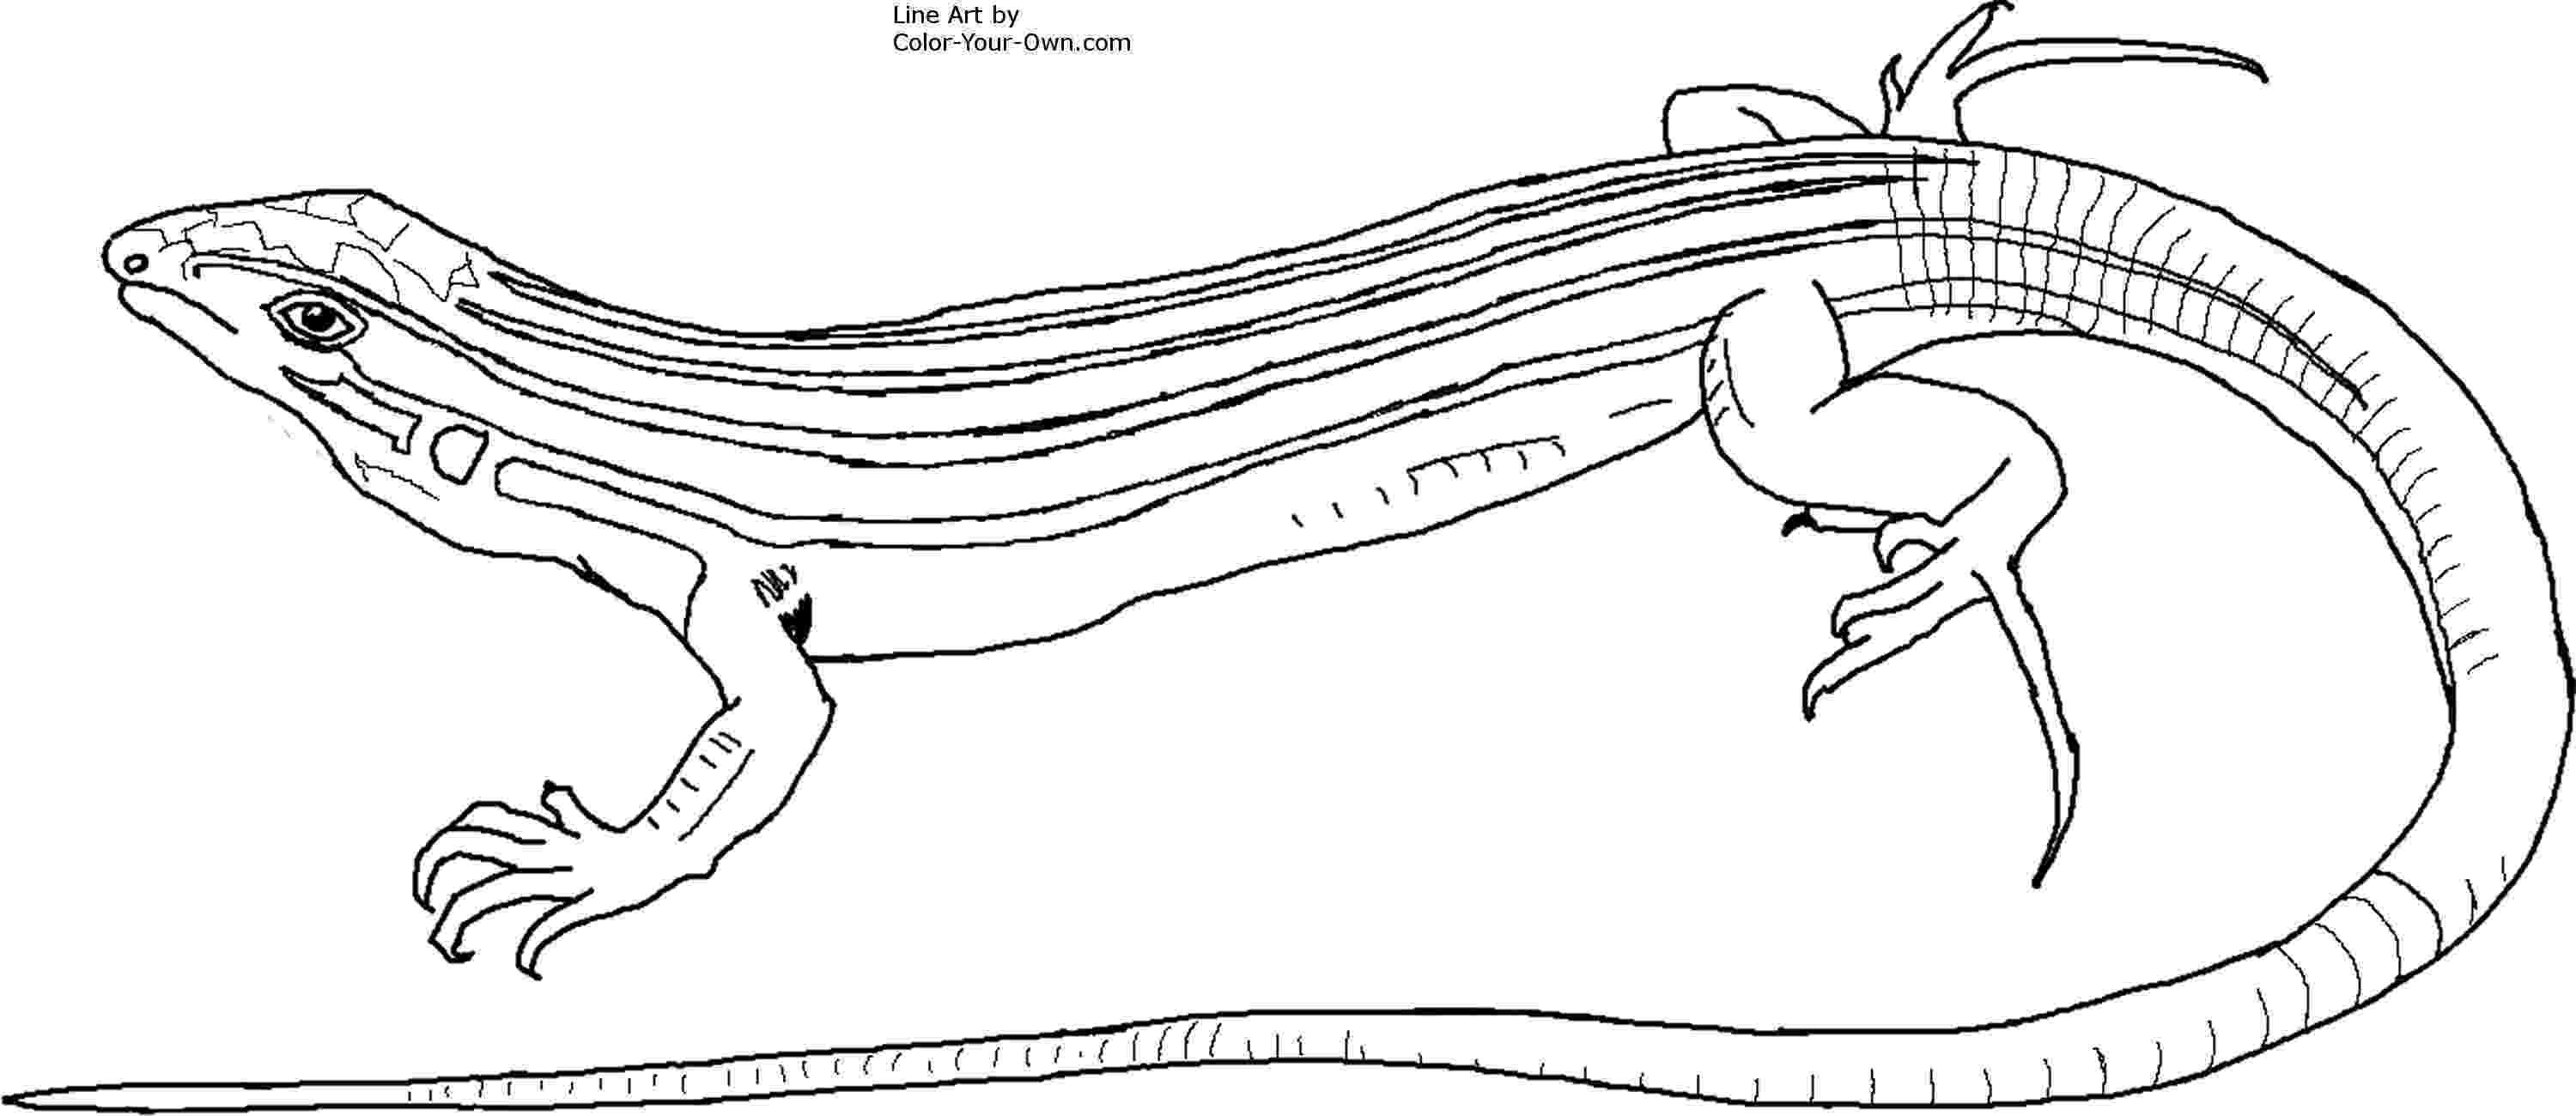 gecko lizard coloring pages 46 gecko coloring pages www gecko coloring page coloring lizard coloring pages gecko 